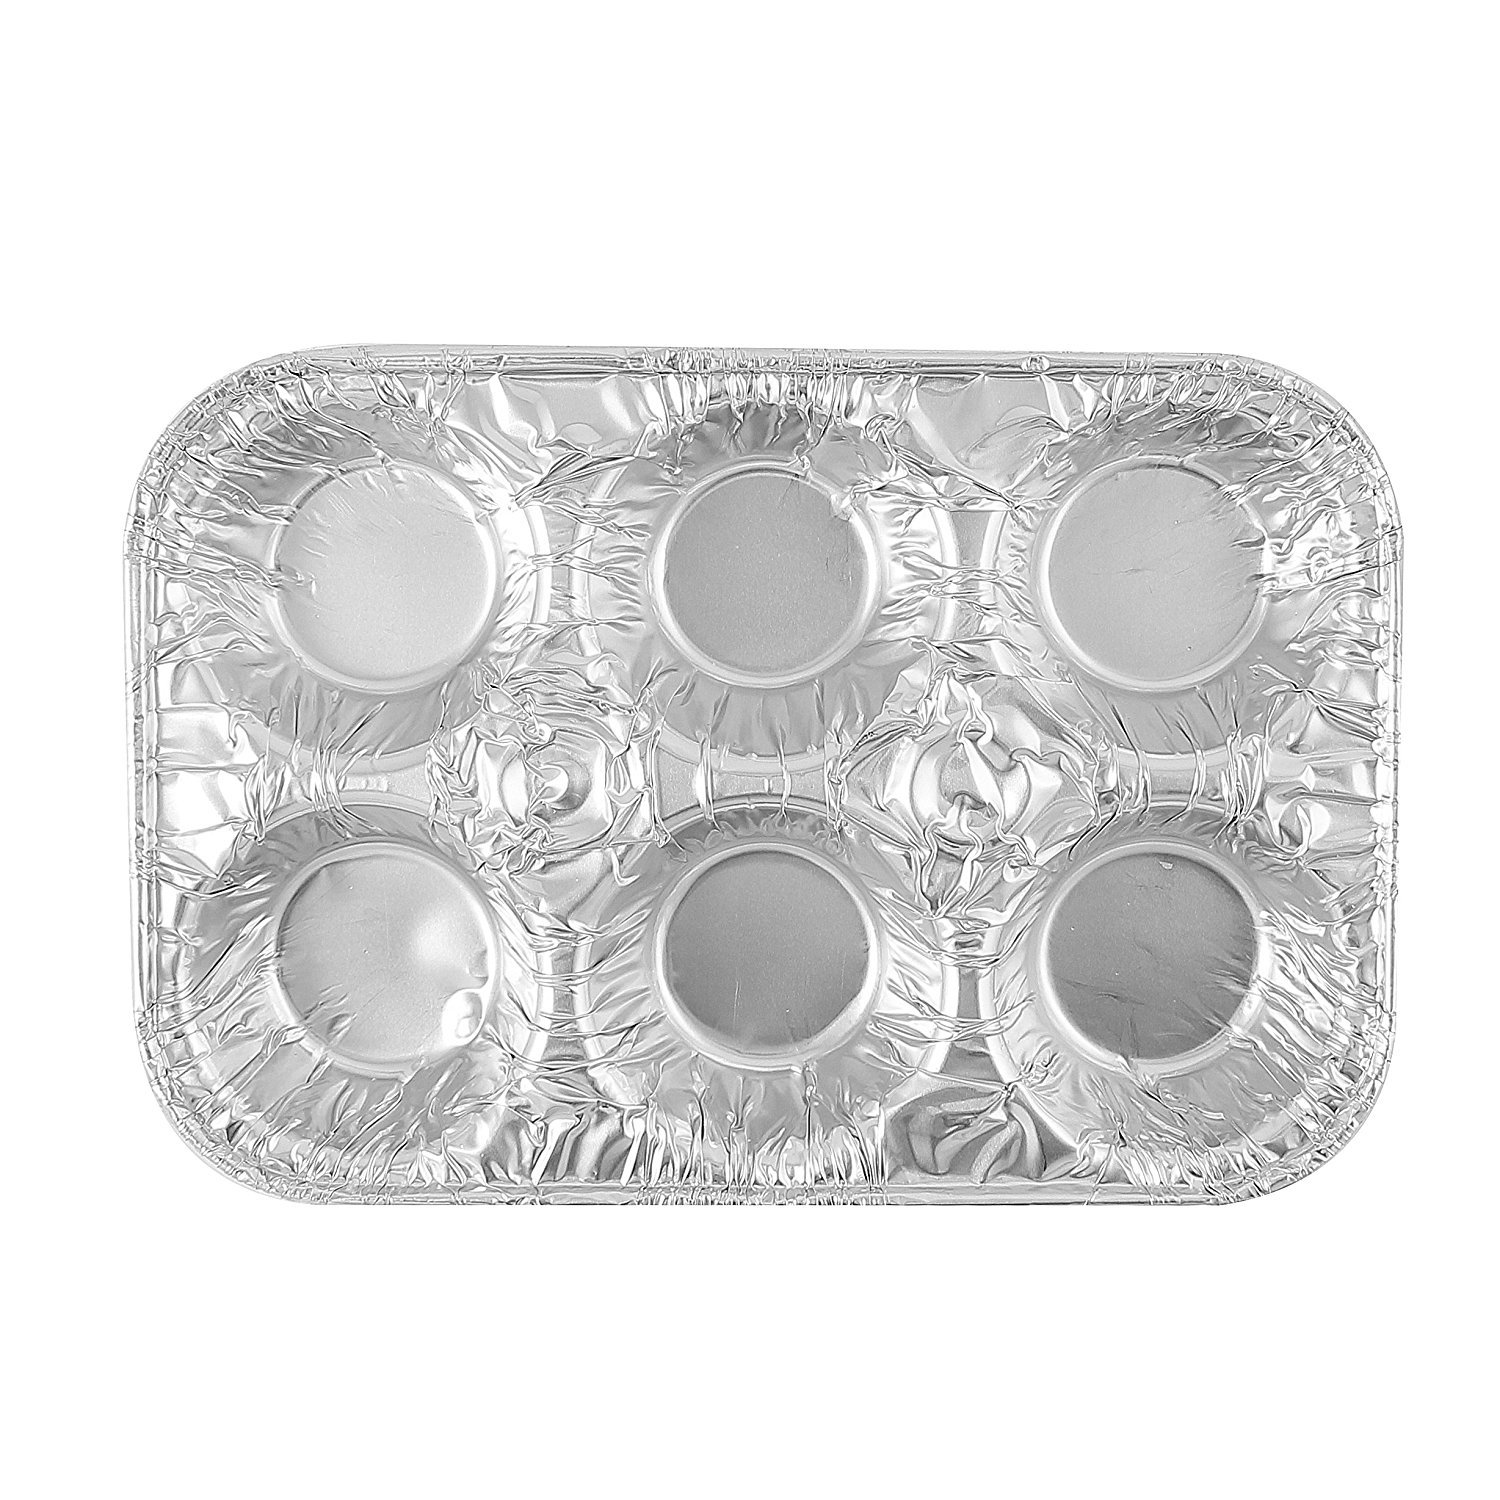 Disposable Aluminum Foil 6-Cup Muffin Tins, 12 Count - Standard Size Cupcake Tins 10" x 6.75" x 1.25"| Made from Recyclable Aluminum